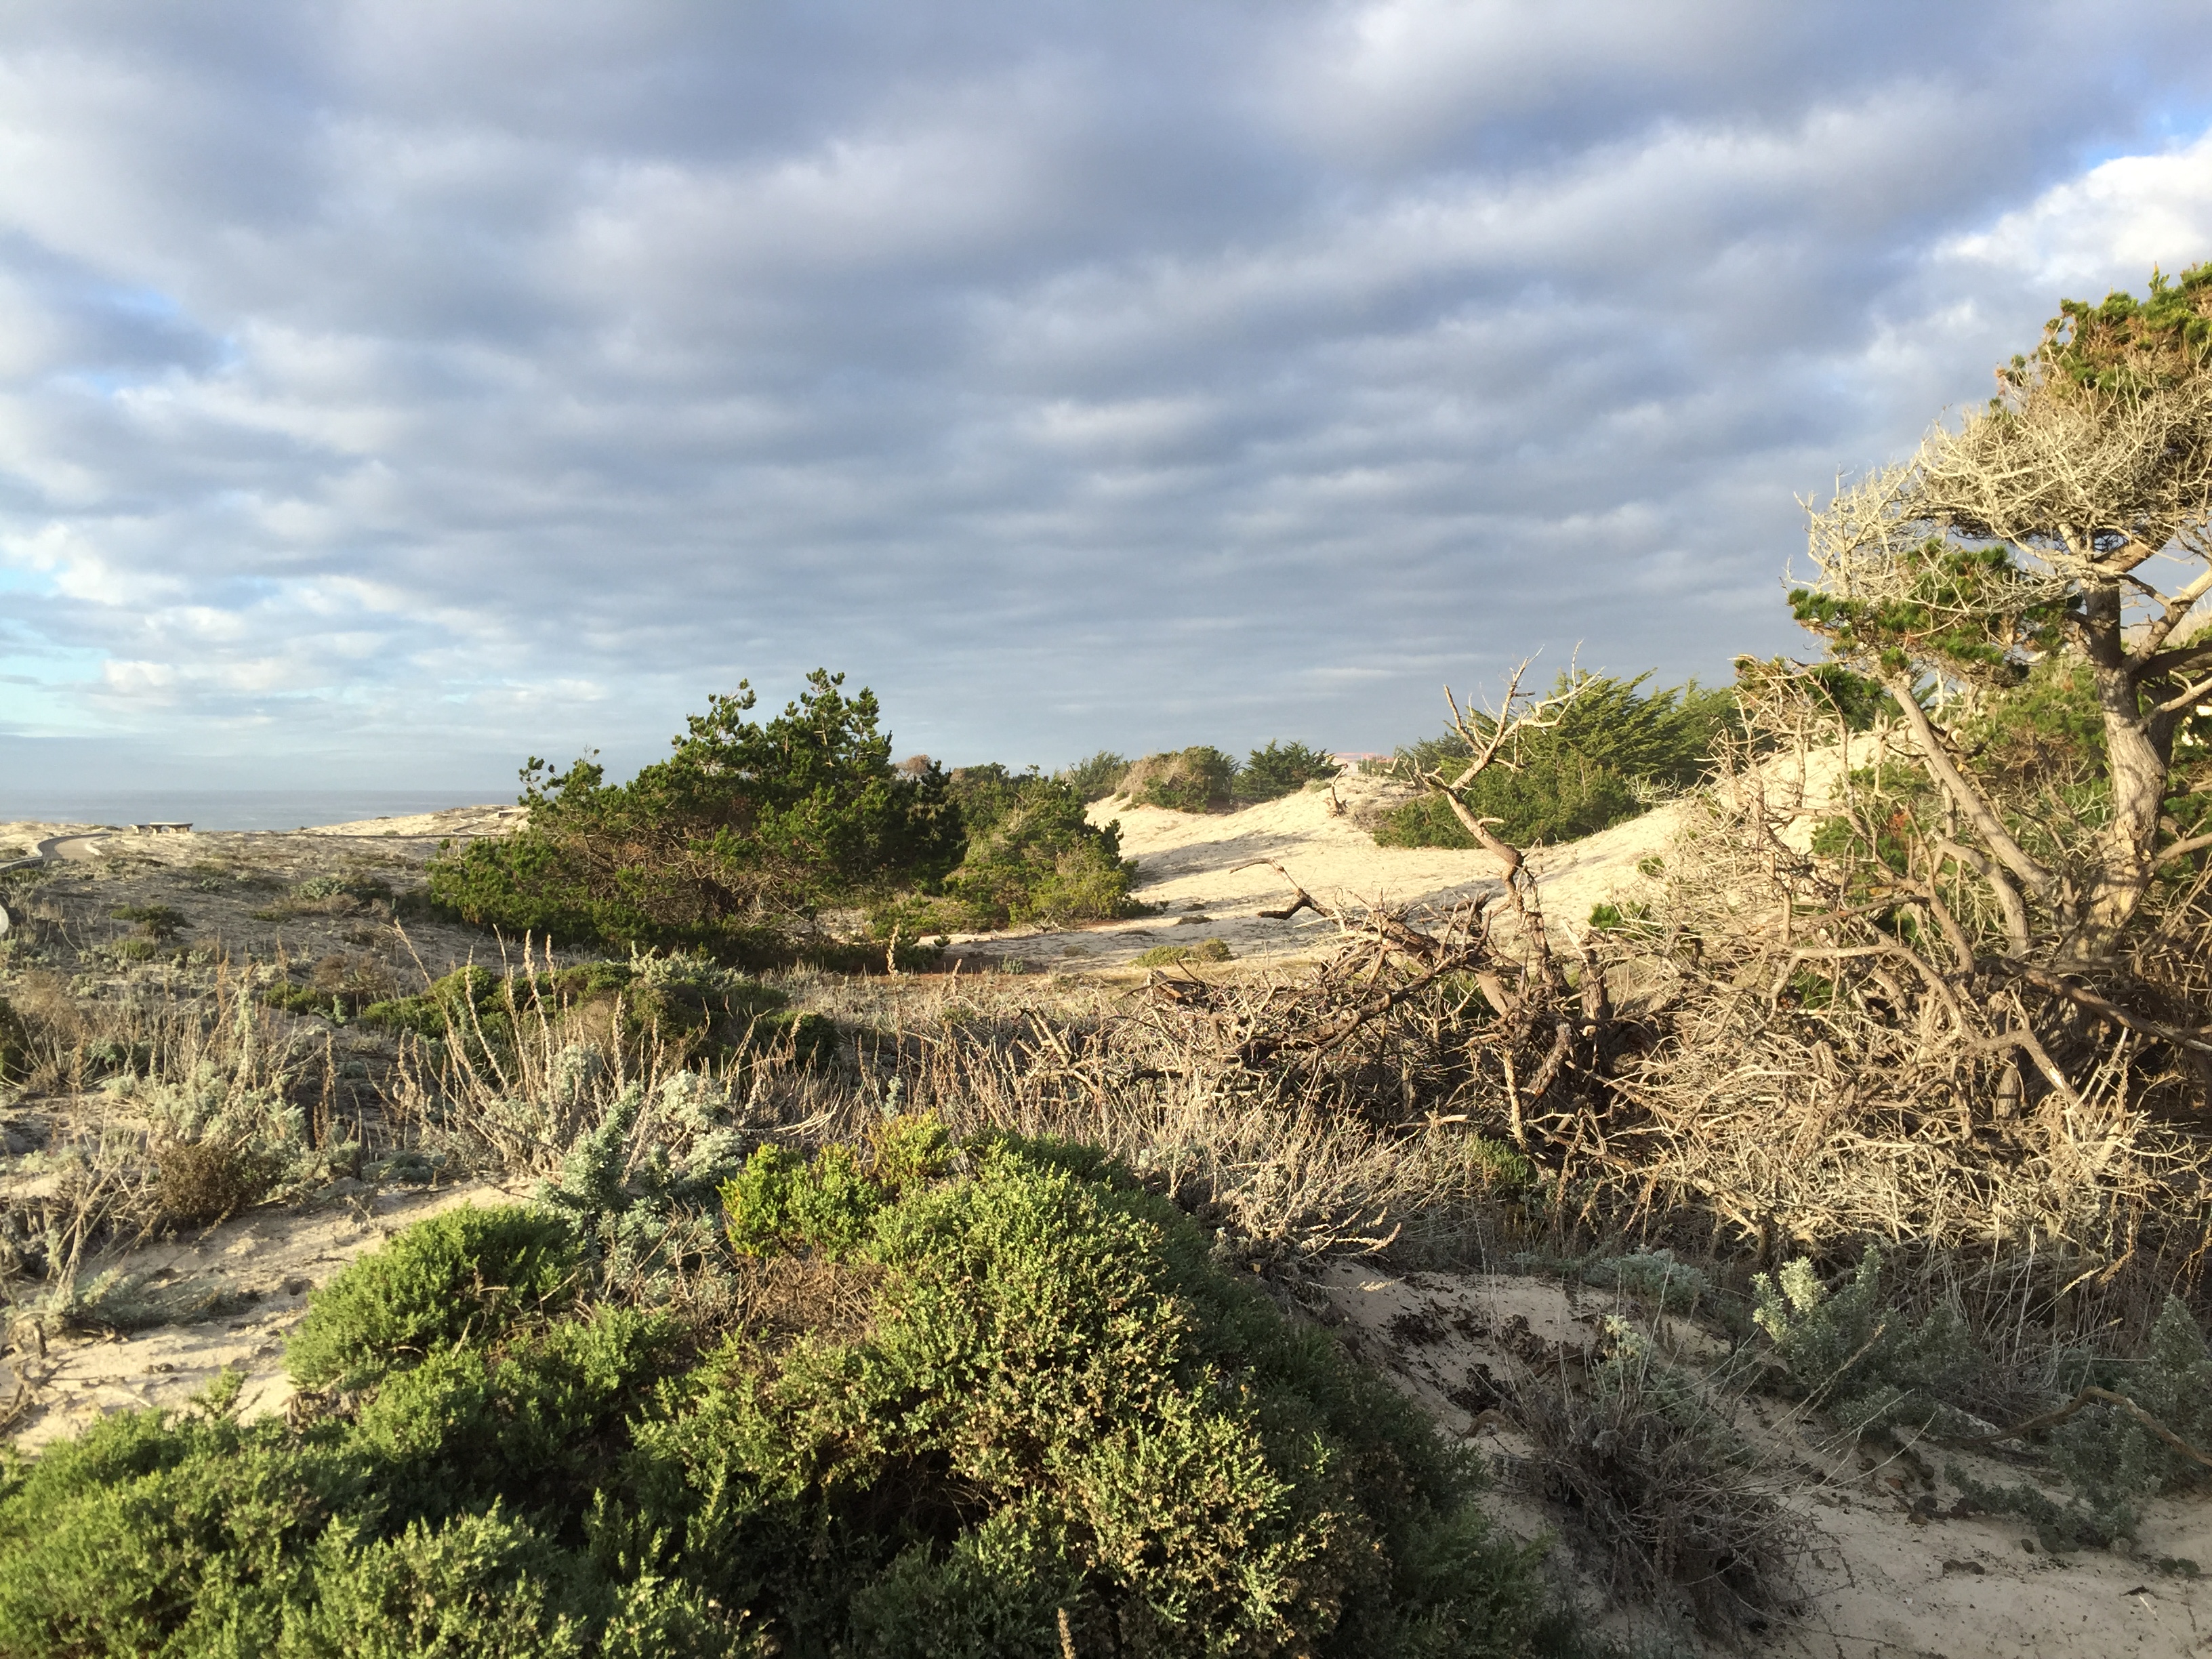 Call for symposium proposals for Asilomar 2023!